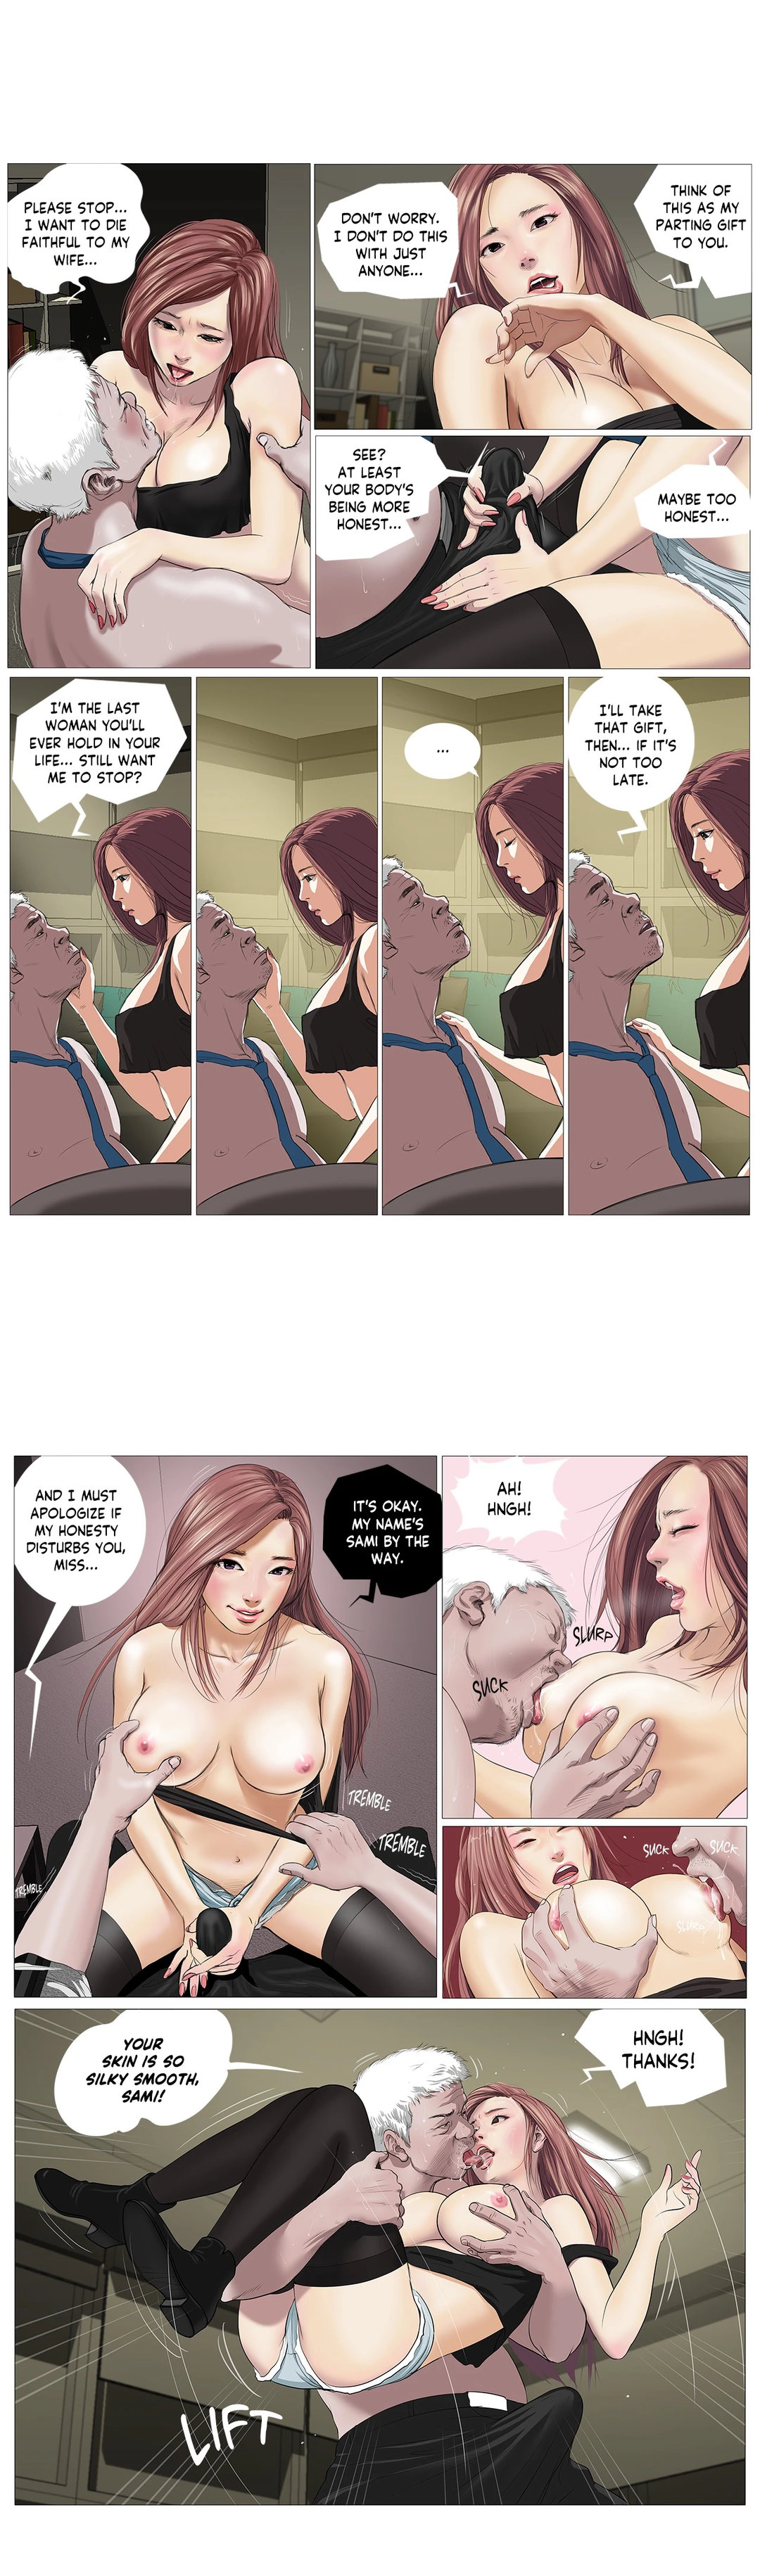 Death Angel - Chapter 2 Page 3